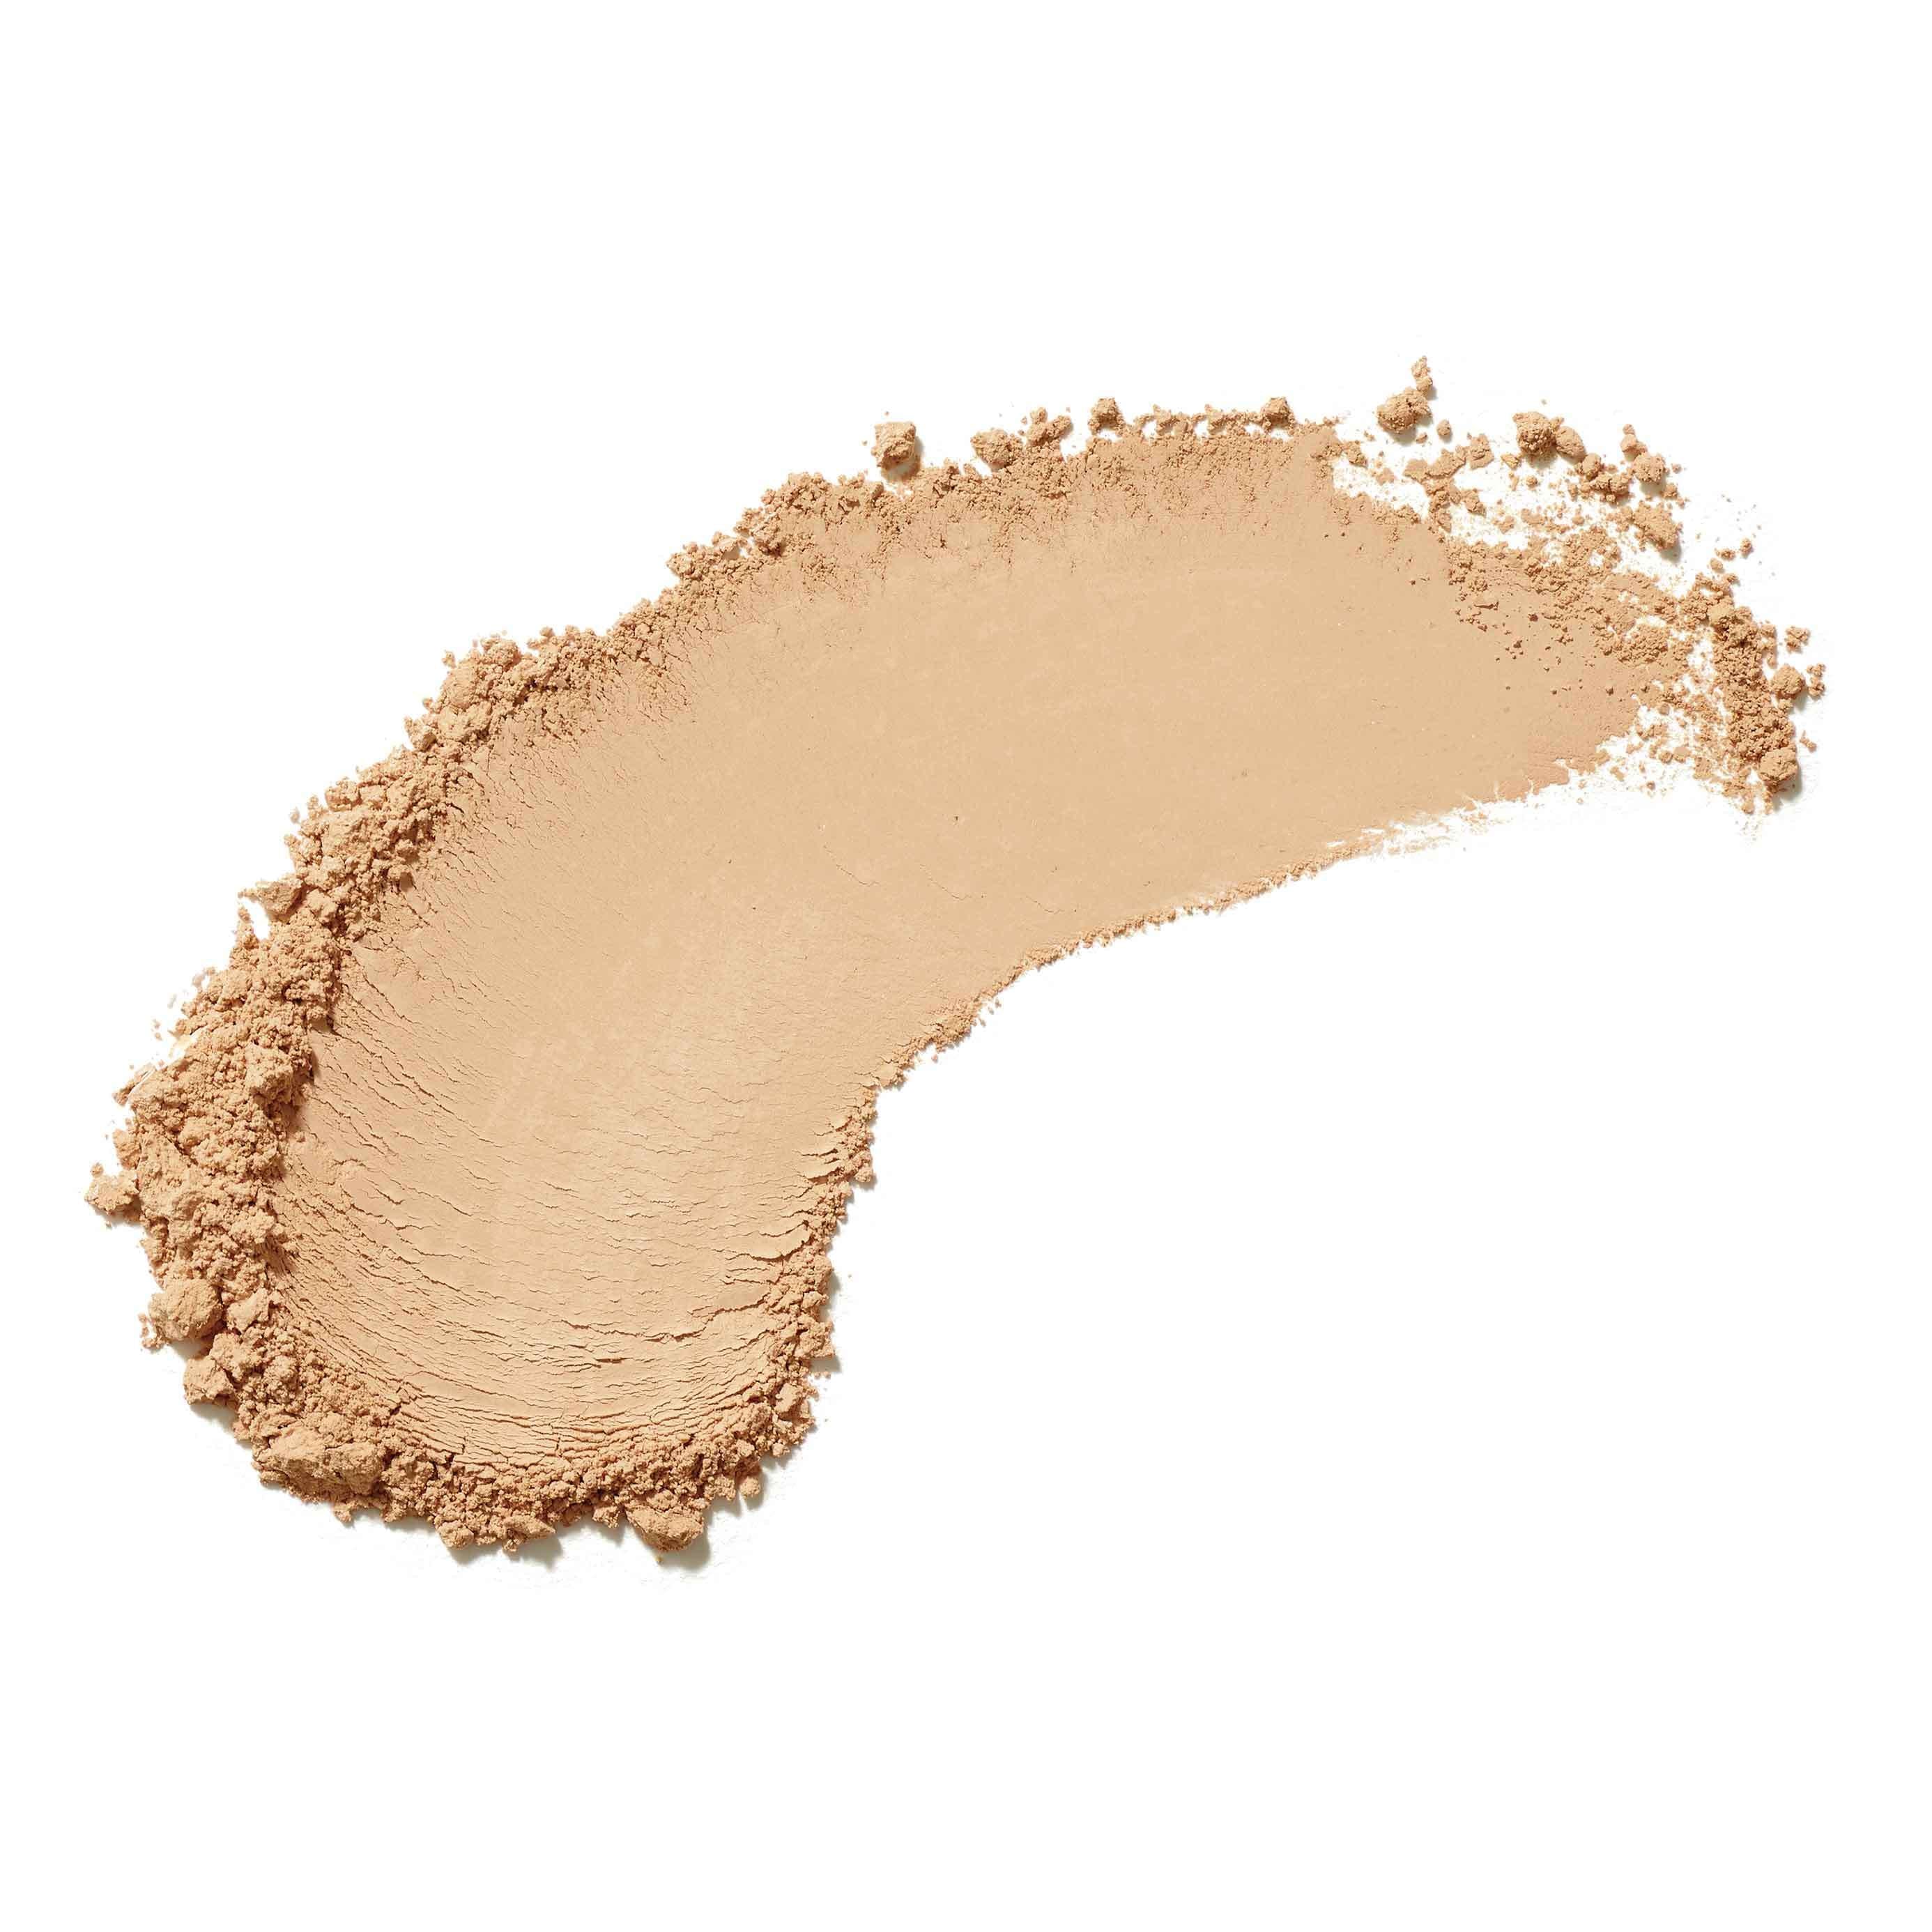 Jane Iredale Amazing Base® Loose Mineral Powder at Socialite Beauty Canada